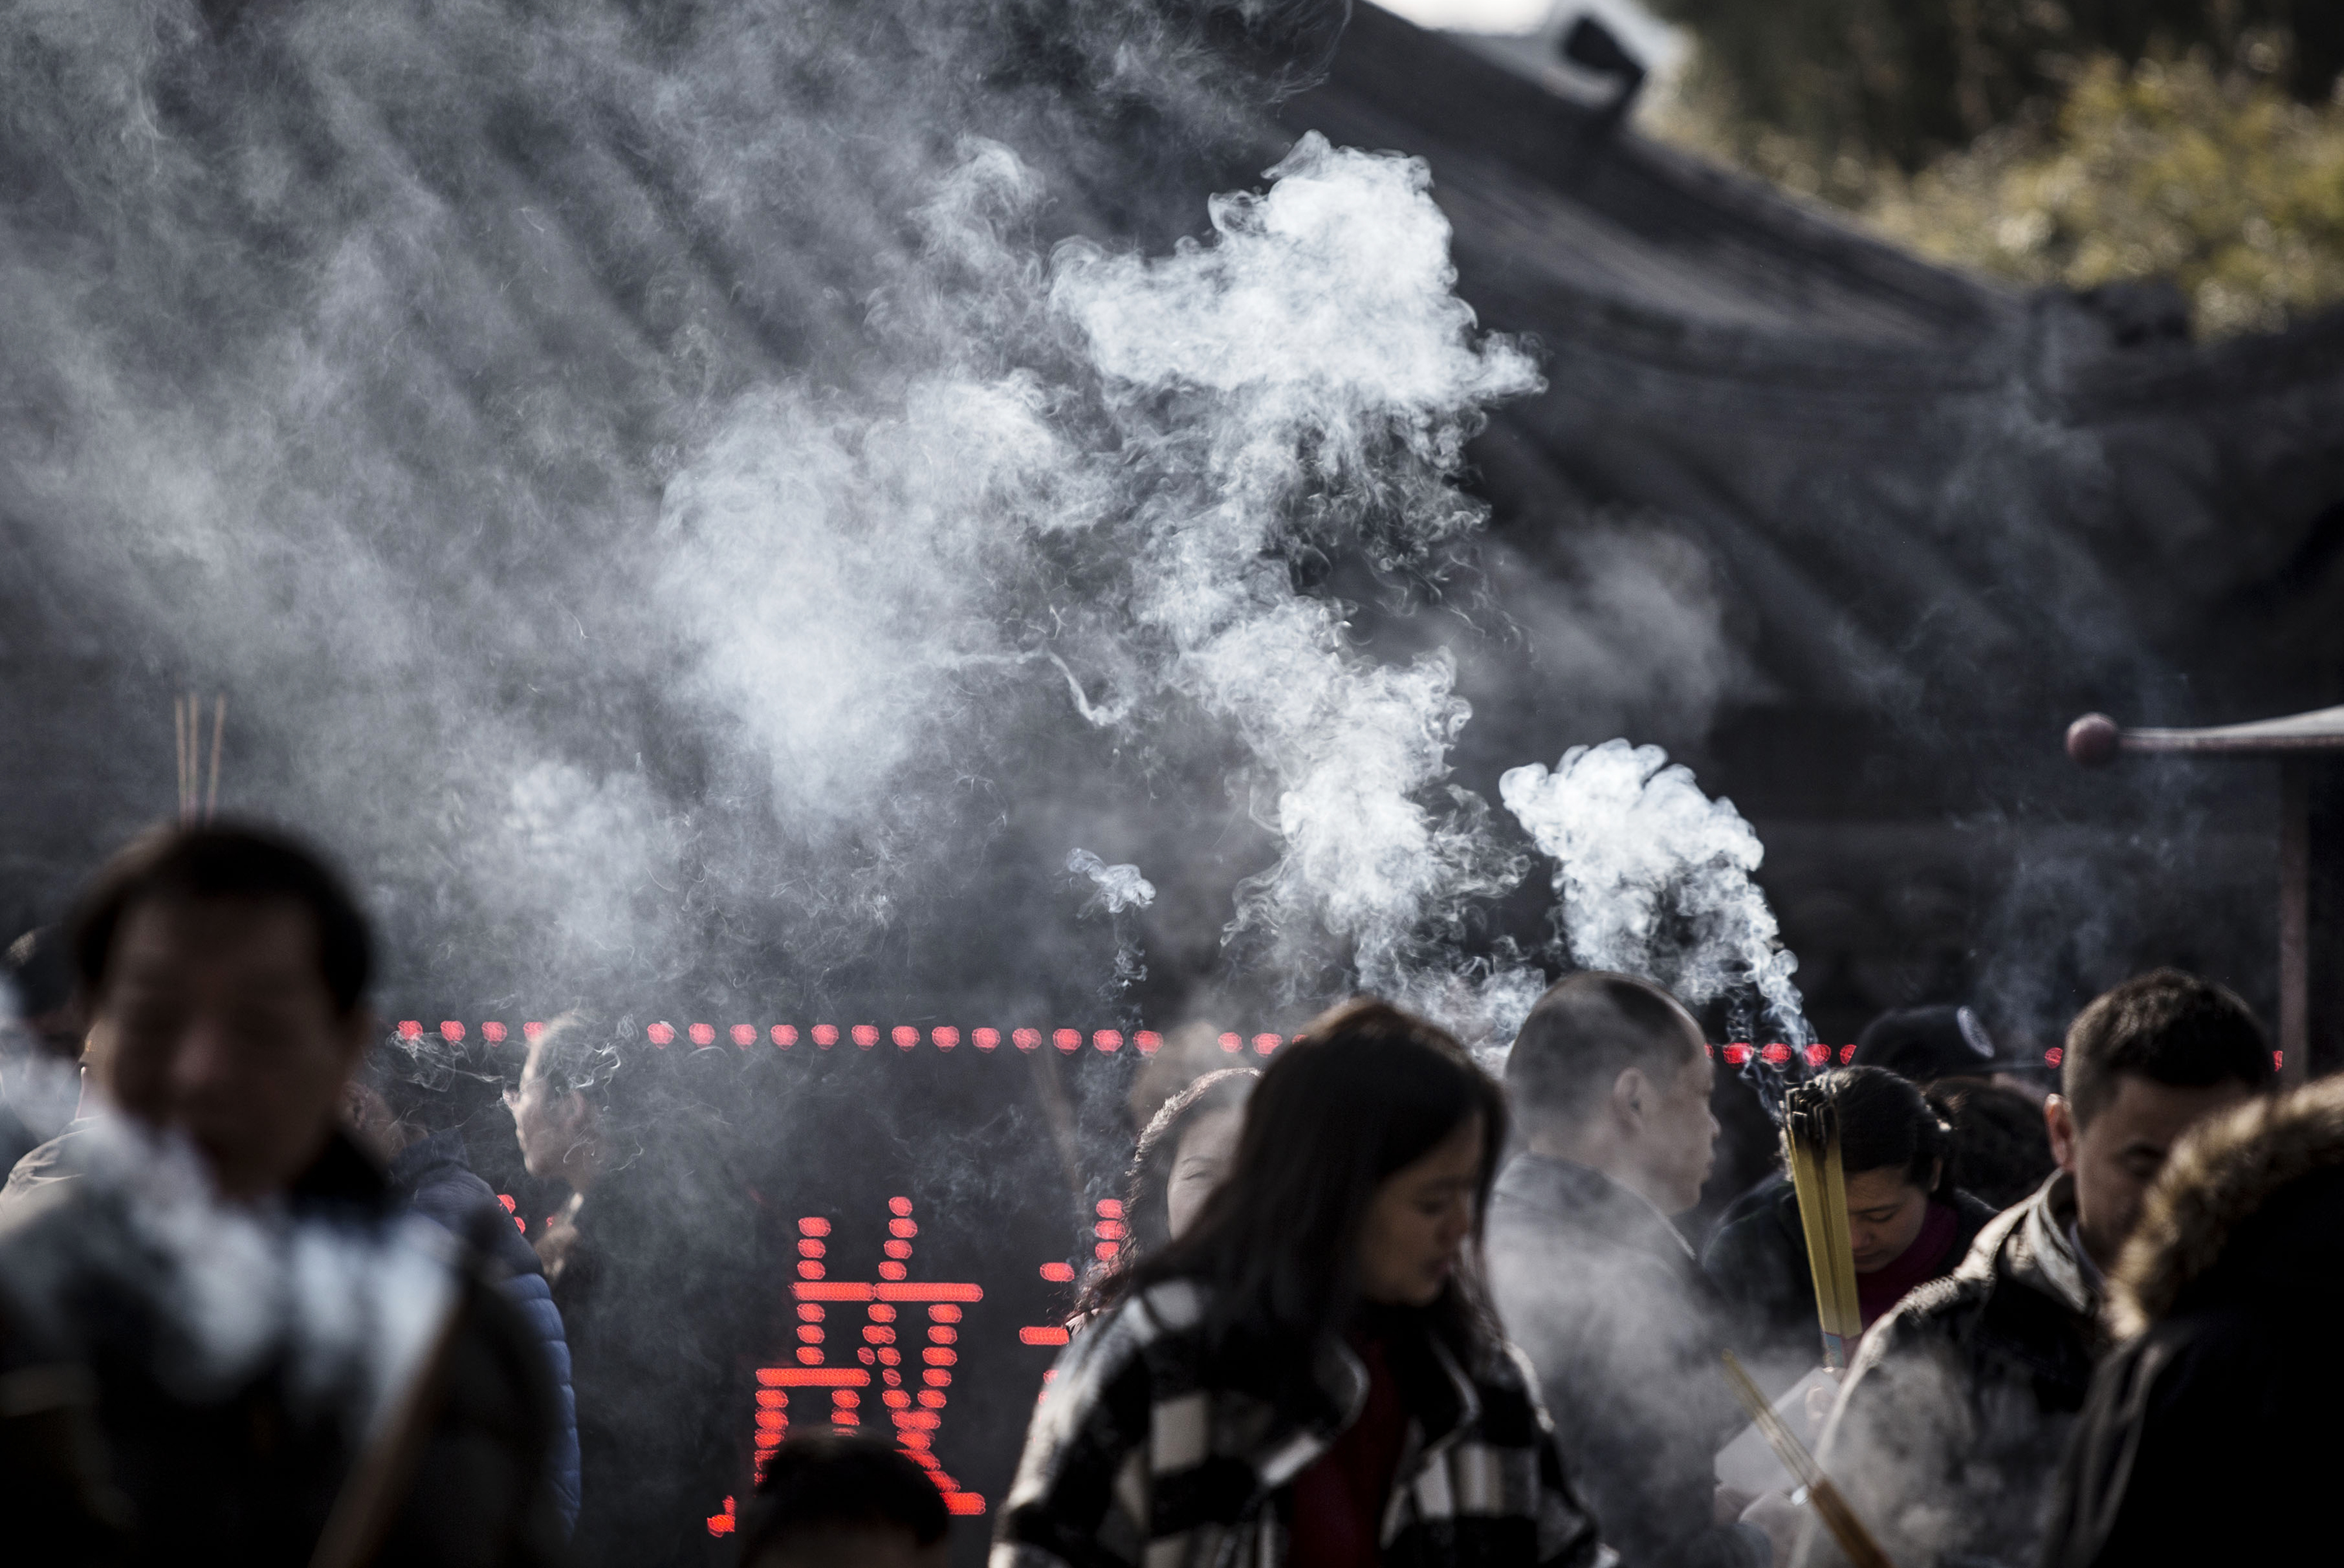 Worshipers pray and make offerings of incense sticks at Longhua Temple in Shanghai, China, on Tuesday, Feb. 9, 2016. (Bloomberg via Getty Images)